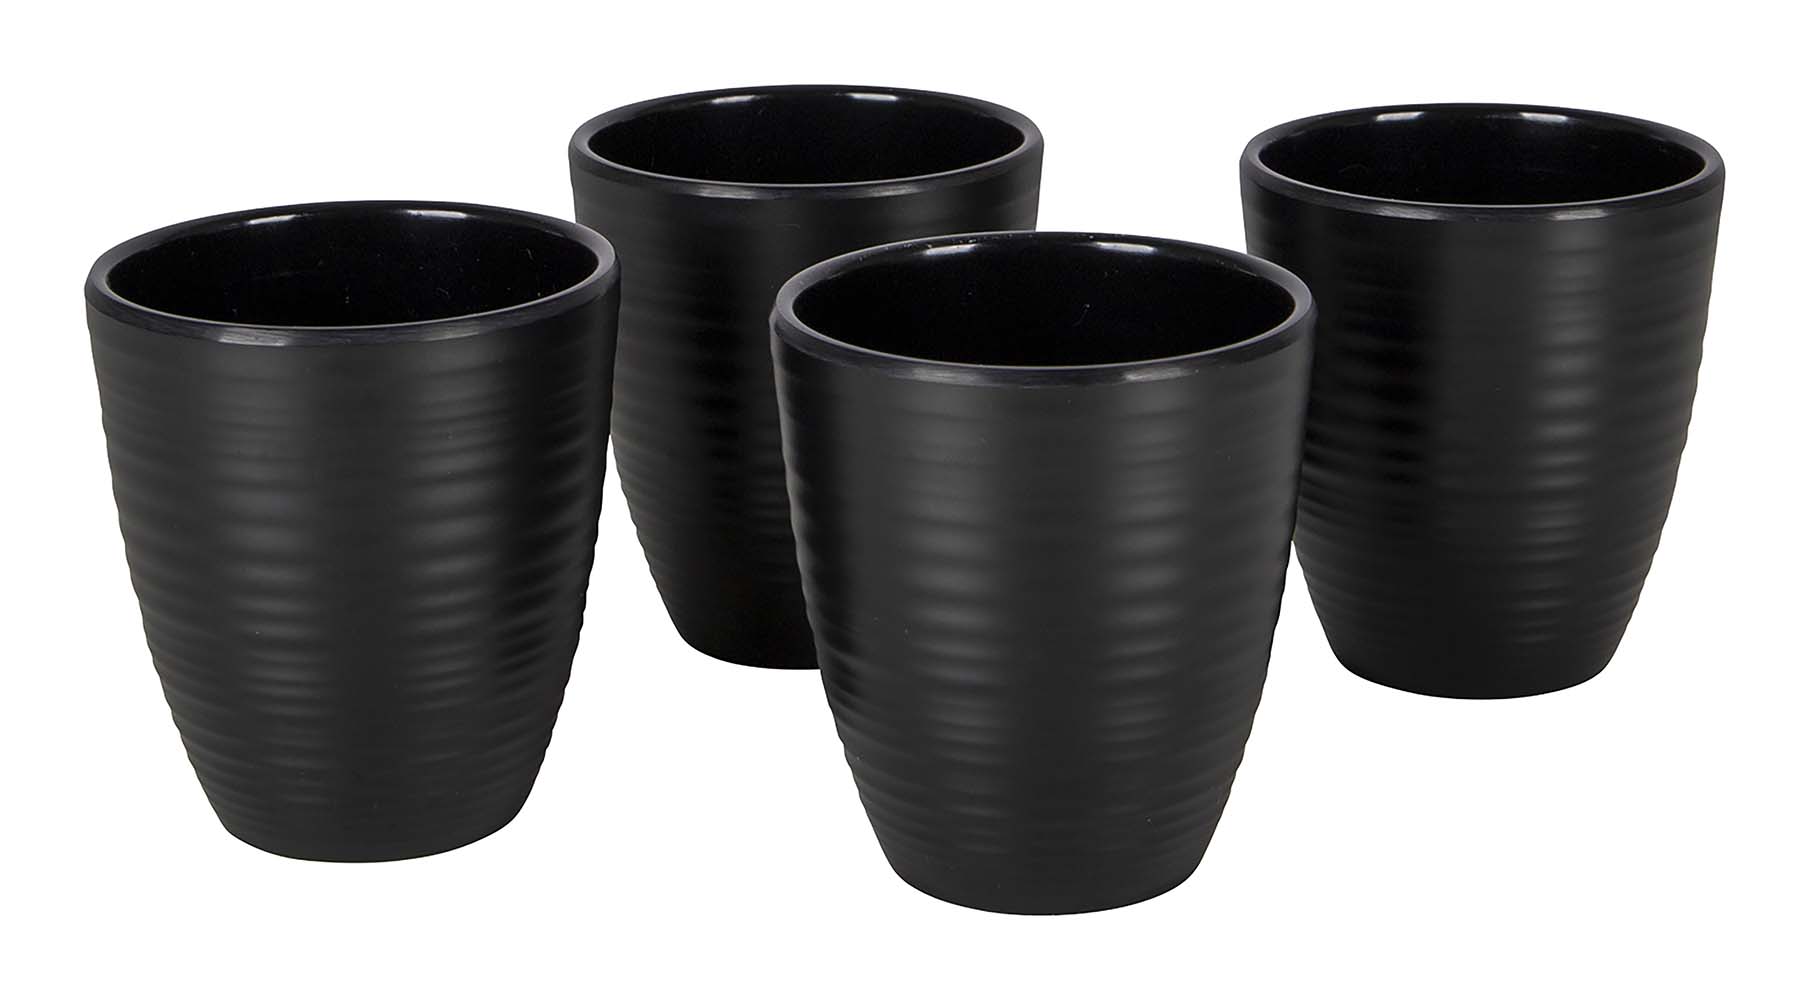 6181494 This Industrial Orville mugs have a robust look. The black dinnerware has a sturdy look with raised edge. Besides the beautiful design, the dinnerware is very light and sturdy. The mugs are good to use on the campsite, as it is virtually unbreakable, shatterproof and scratch-resistant. The mugs can also be used perfectly at home. The 4-piece set is made of high quality 100% melamine and is dishwasher safe and food approved.